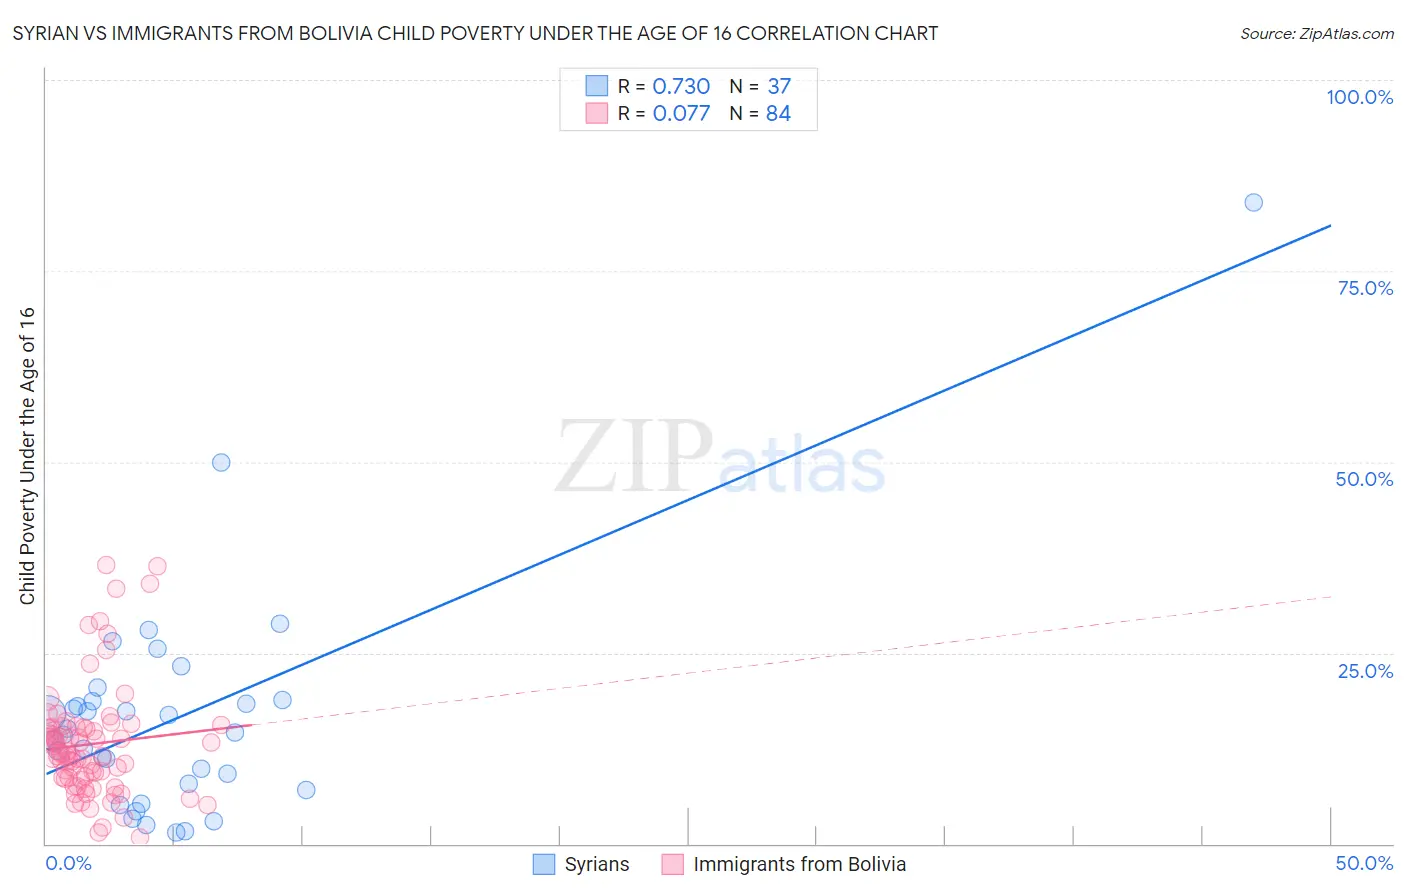 Syrian vs Immigrants from Bolivia Child Poverty Under the Age of 16